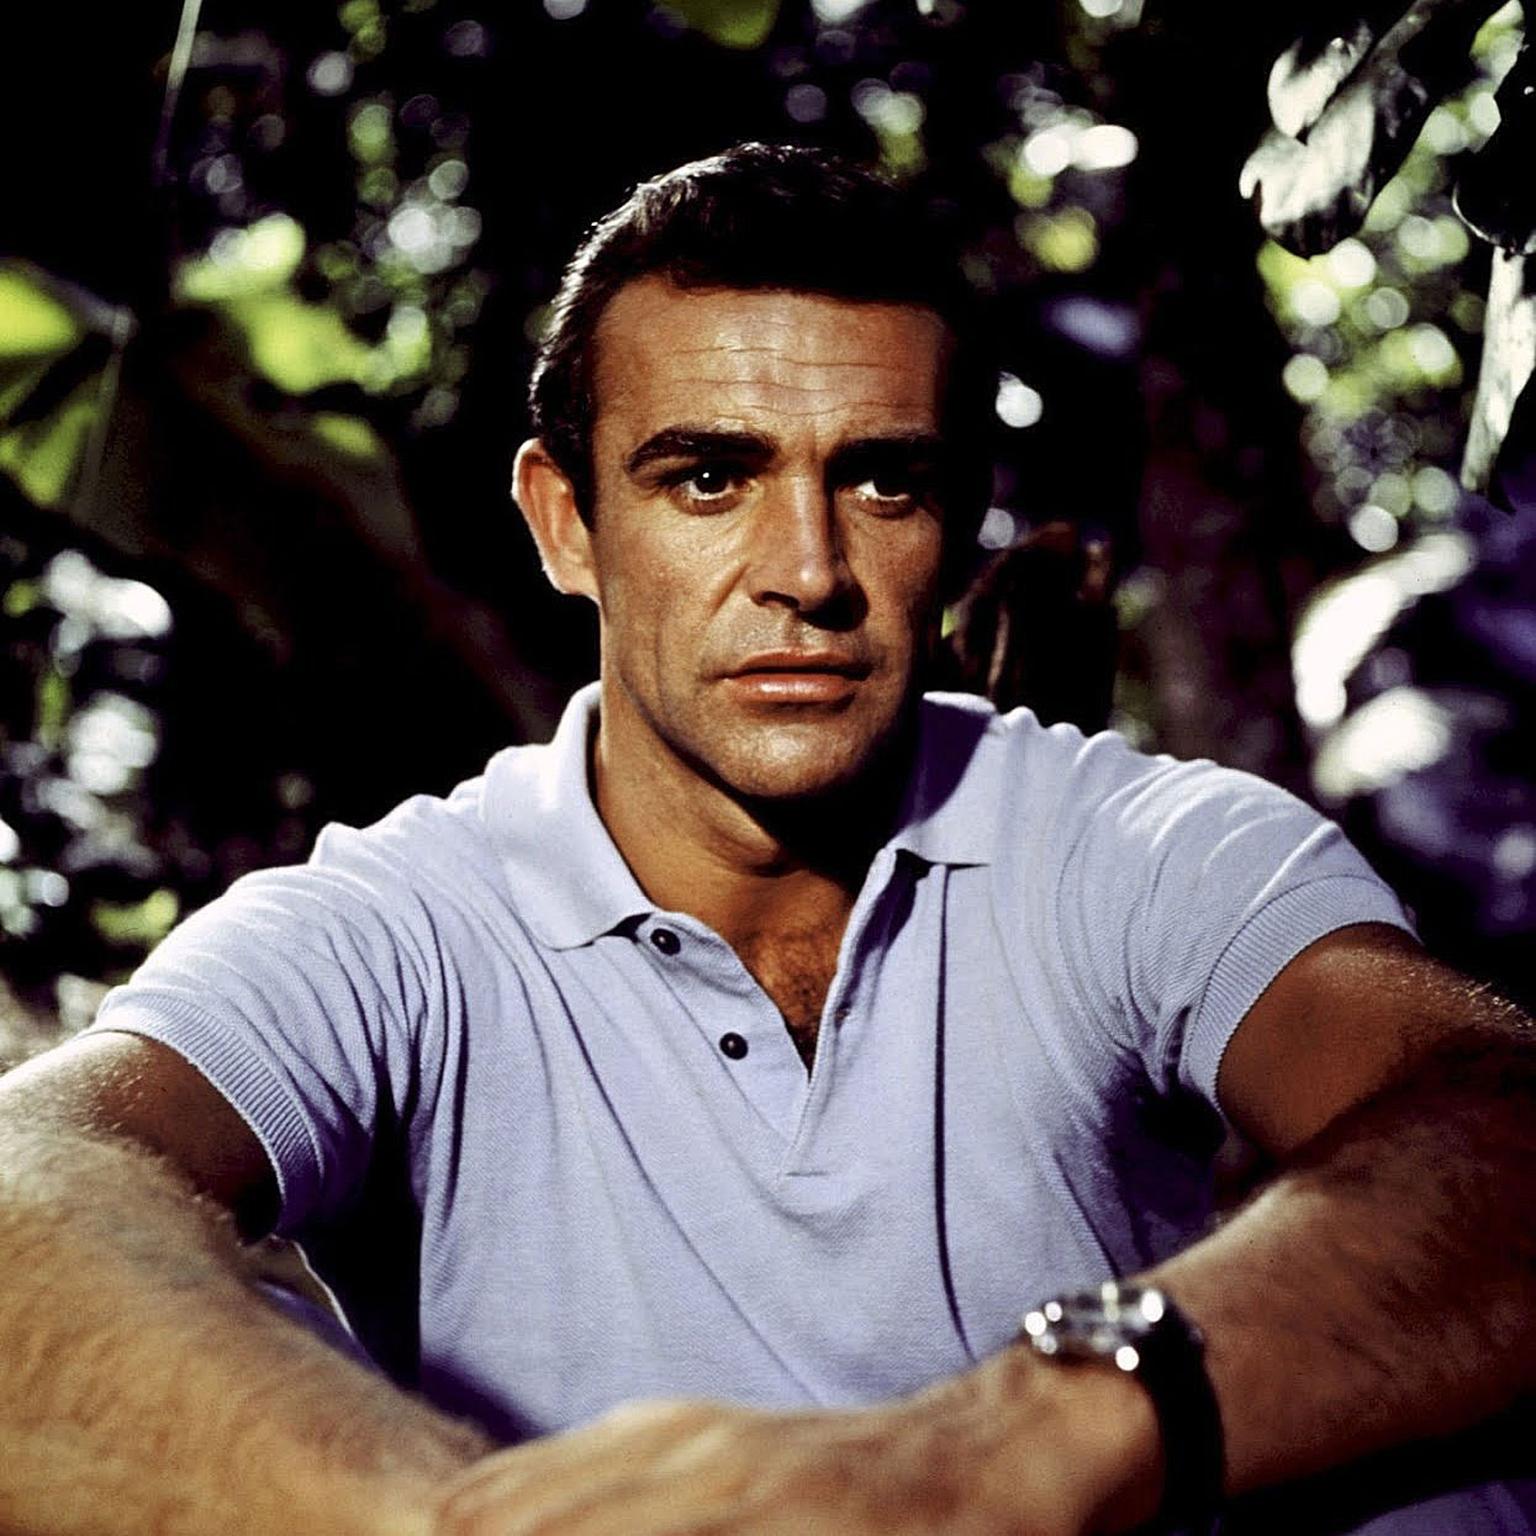 Lys studieafgift Bemærk Sean Connery and the first James Bond watch | The Jewellery Editor